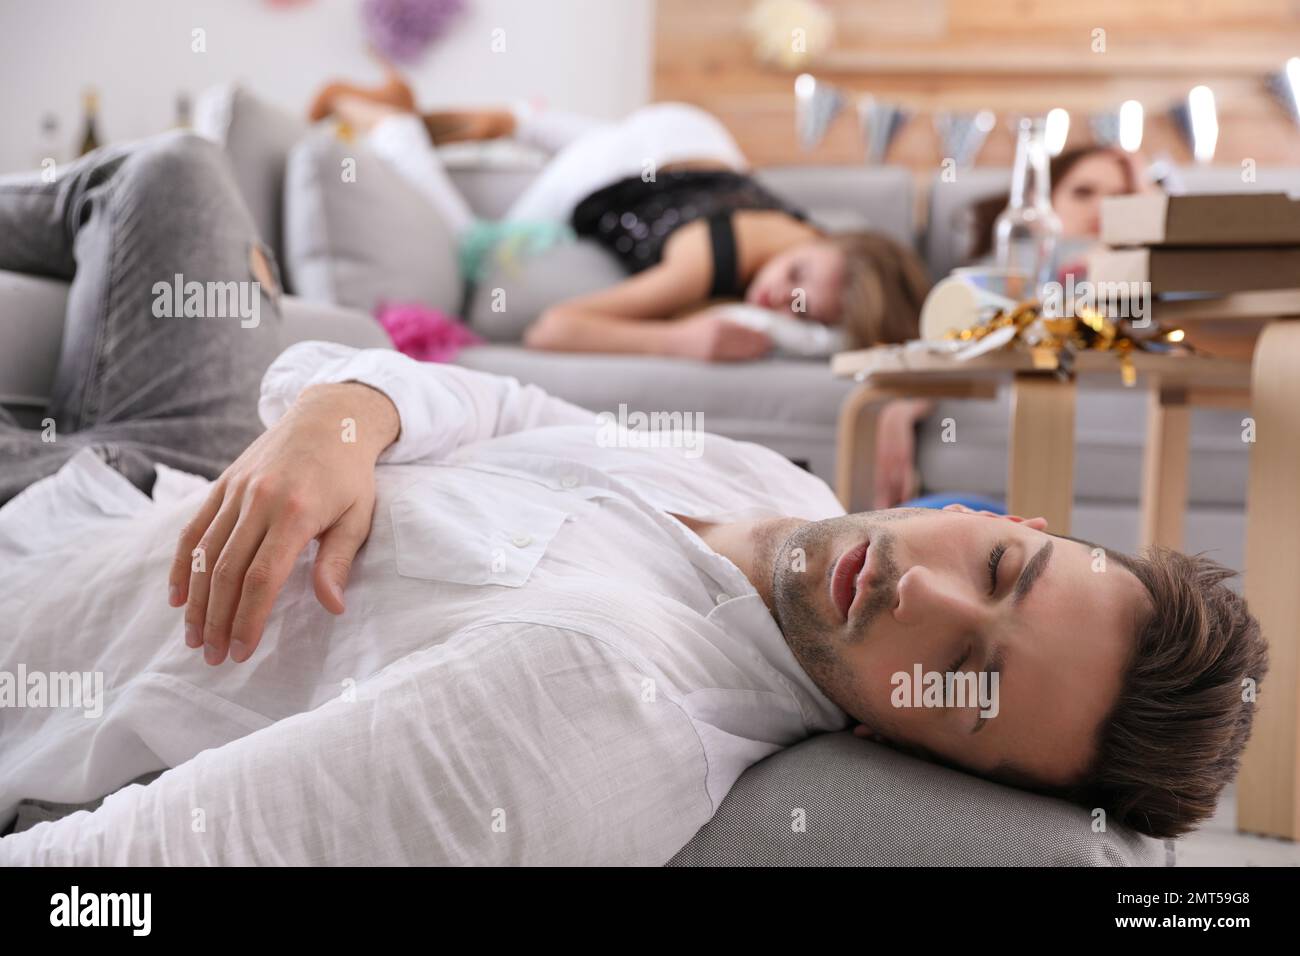 Young man sleeping in messy room after party Stock Photo